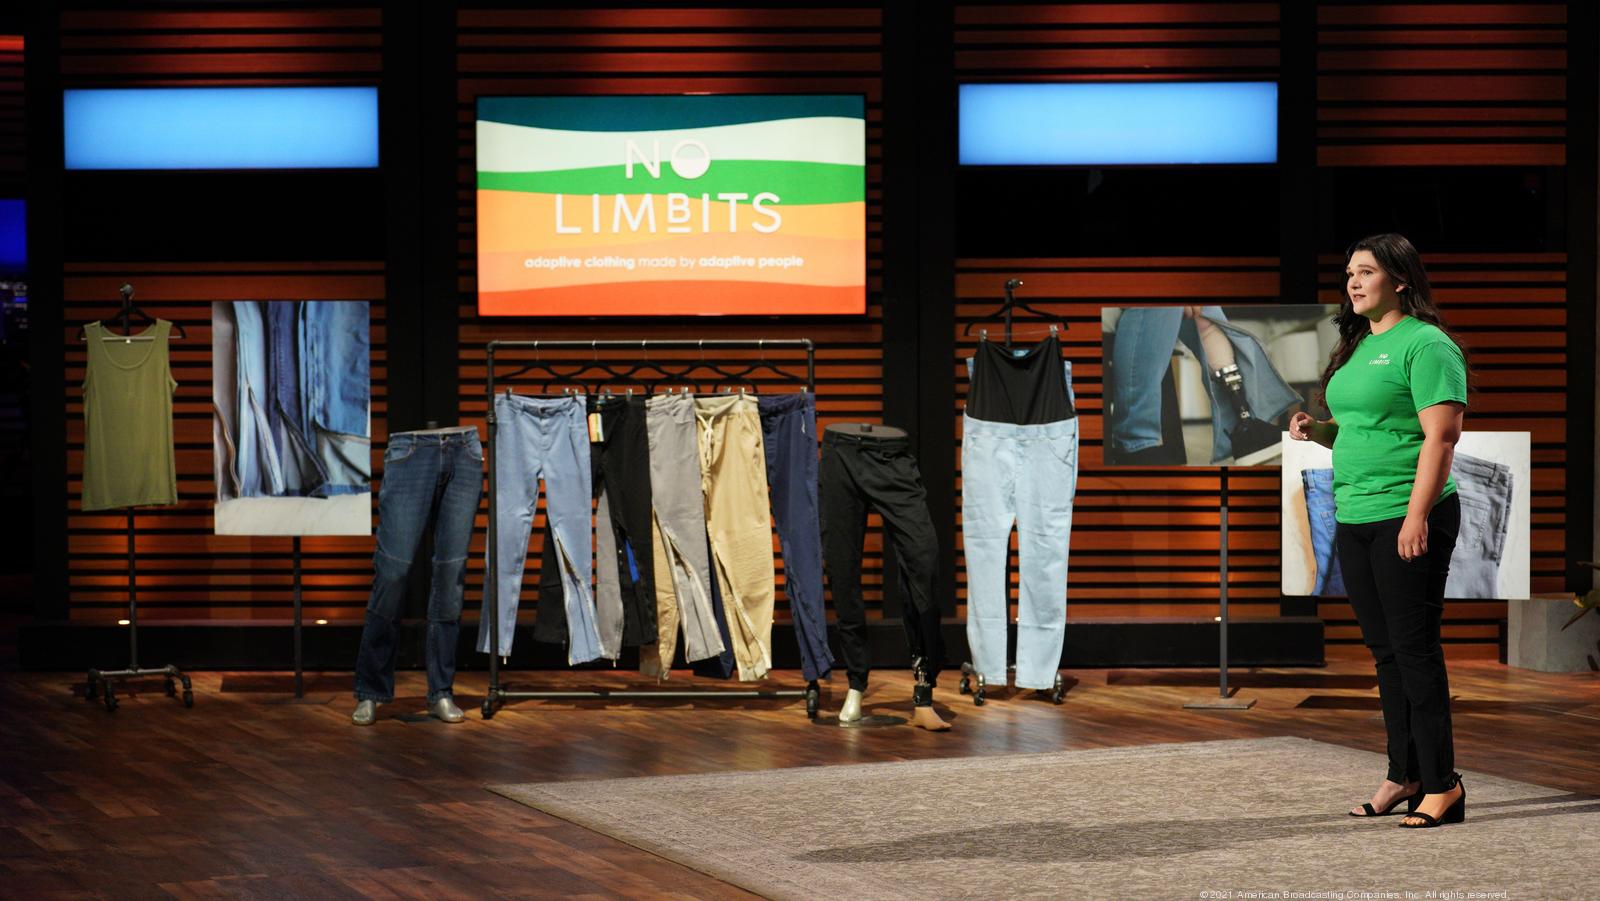 Shark Tank Fashion Brands and Companies: Where Are They Now?